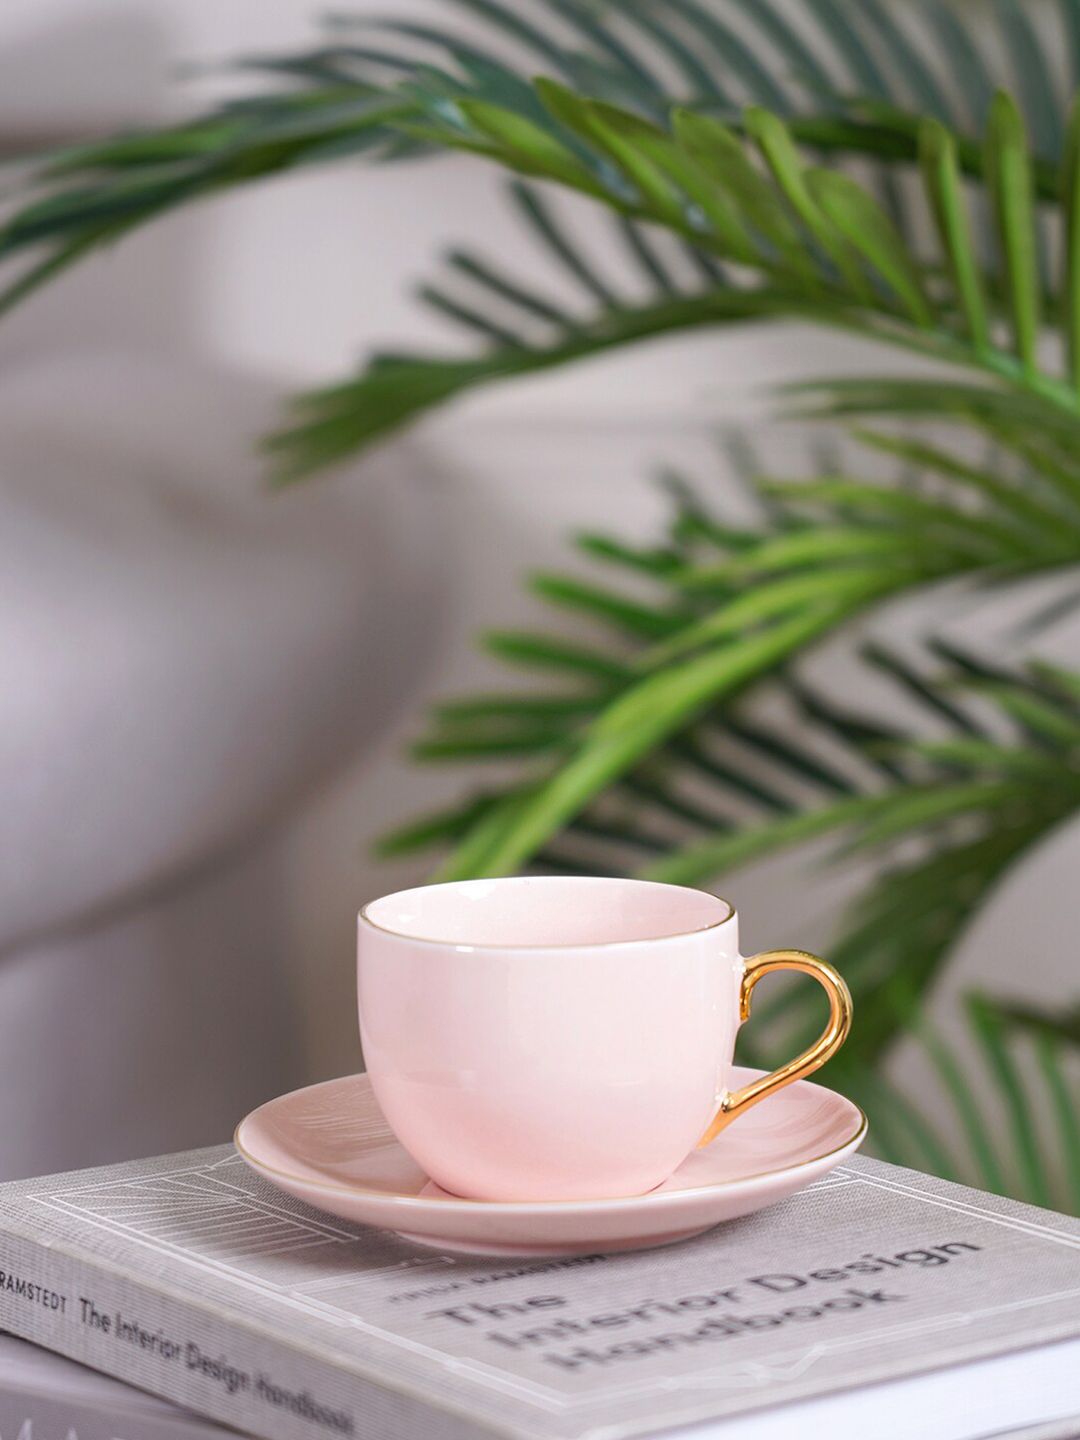 Pure Home and Living 6 Solid Porcelain Glossy Cups and Saucers Set of Cups and Mugs Price in India